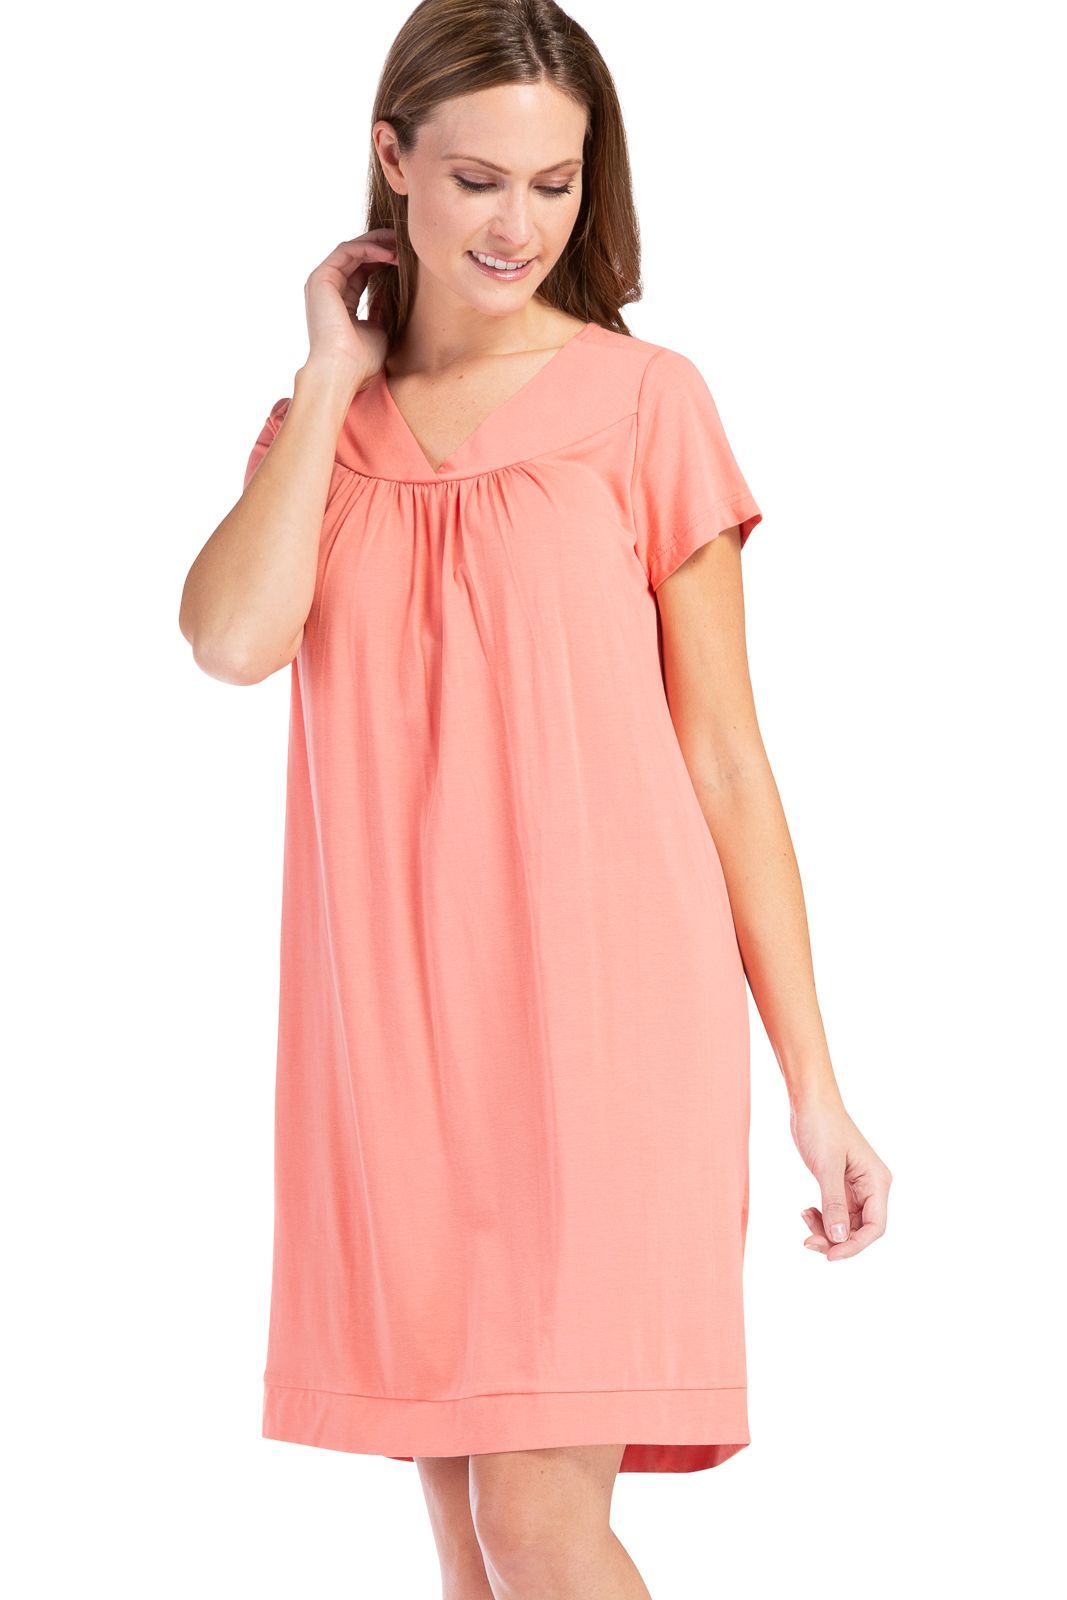 Women's Nightgown | Organic Cotton V-Neck Nightgown | Fishers Finery